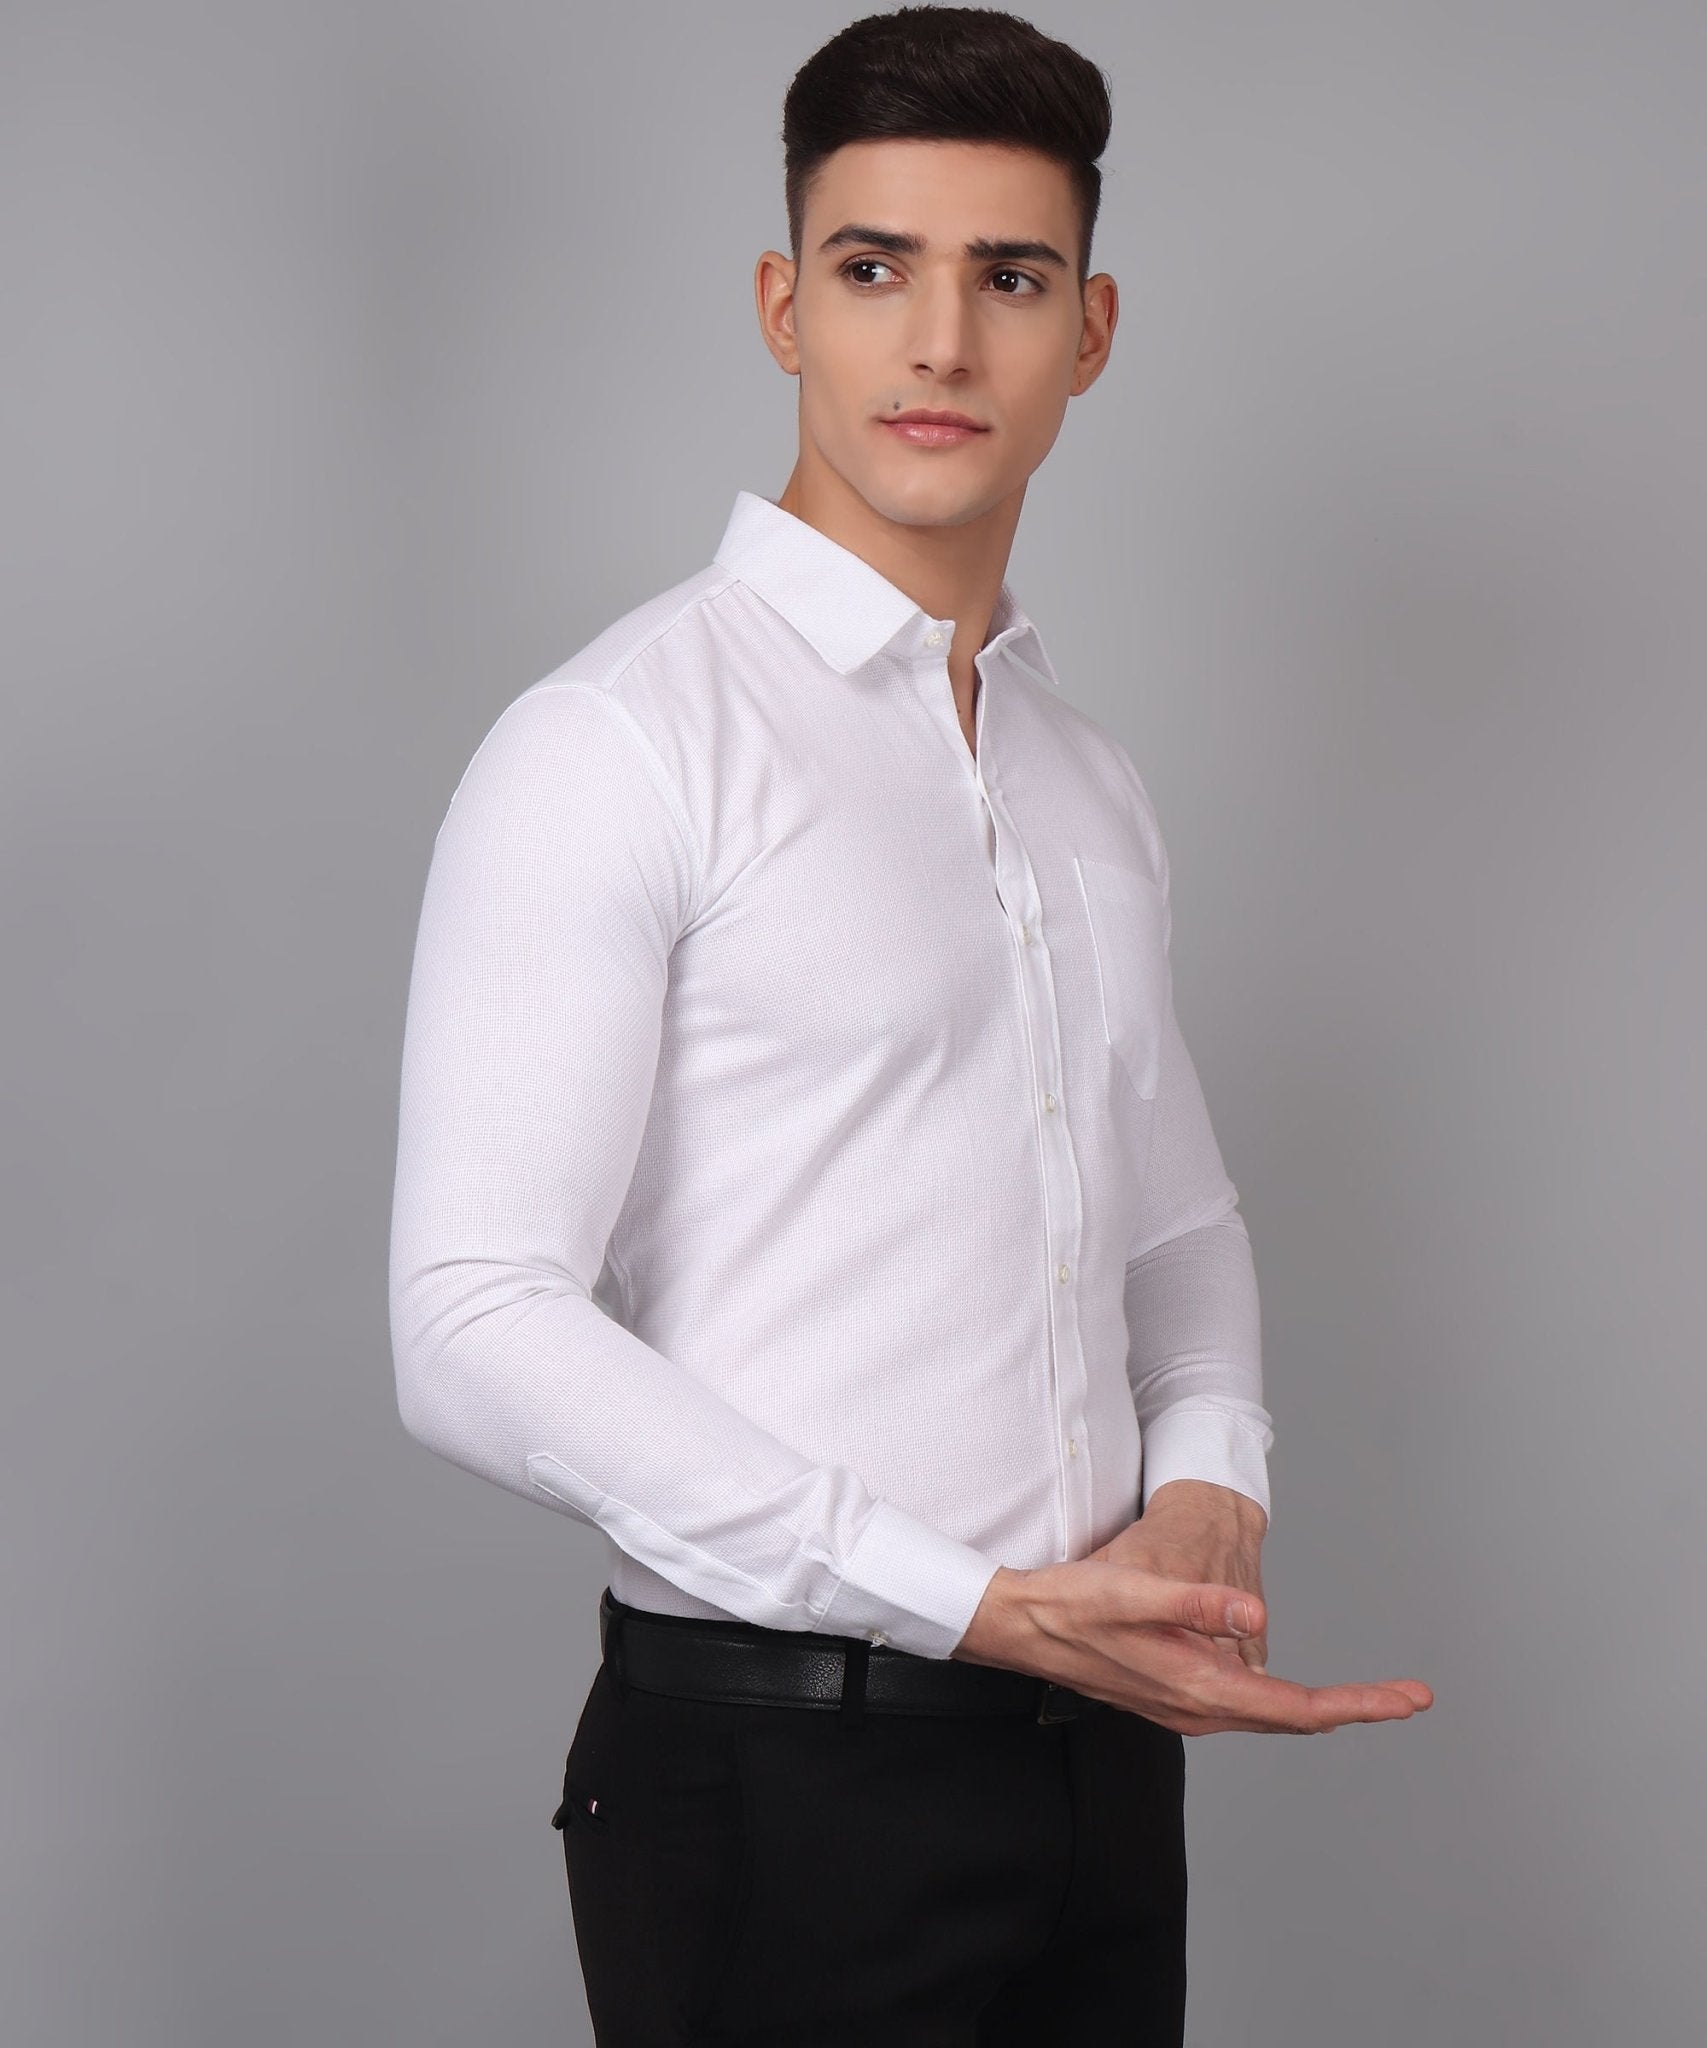 Luxe TryBuy Premium White Cotton Solid Casual/Formal Shirt For Men - TryBuy® USA🇺🇸